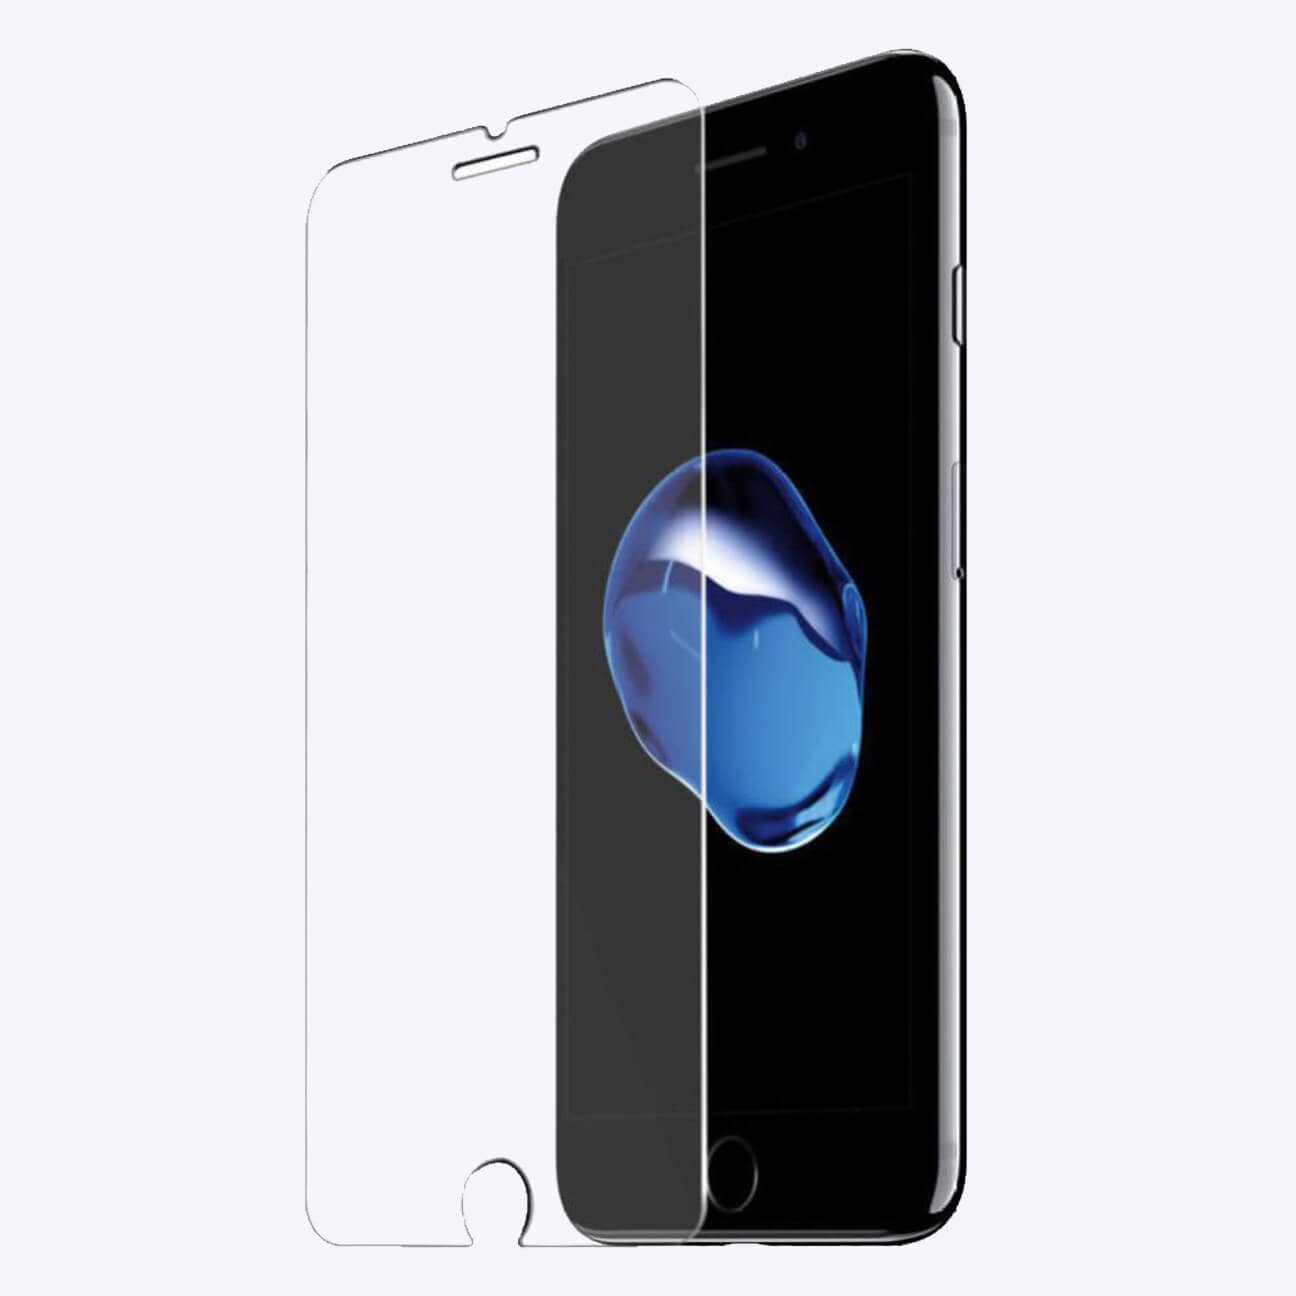 Samsung Galaxy A6 Plus Tempered Glass Screen Protector